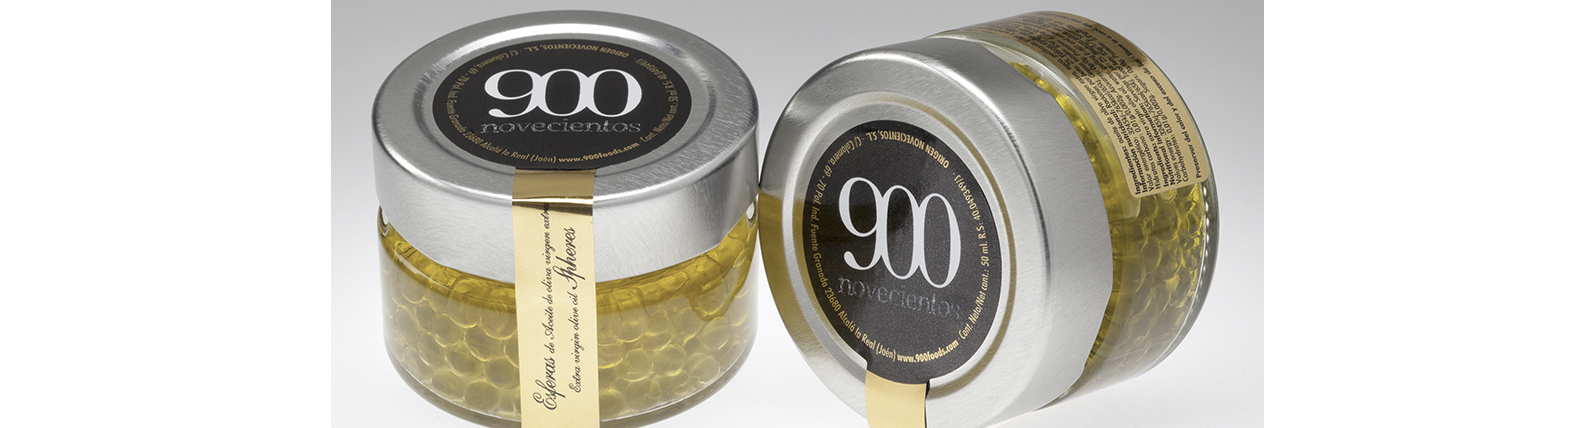 caviar d'huile d'olive extra vierge